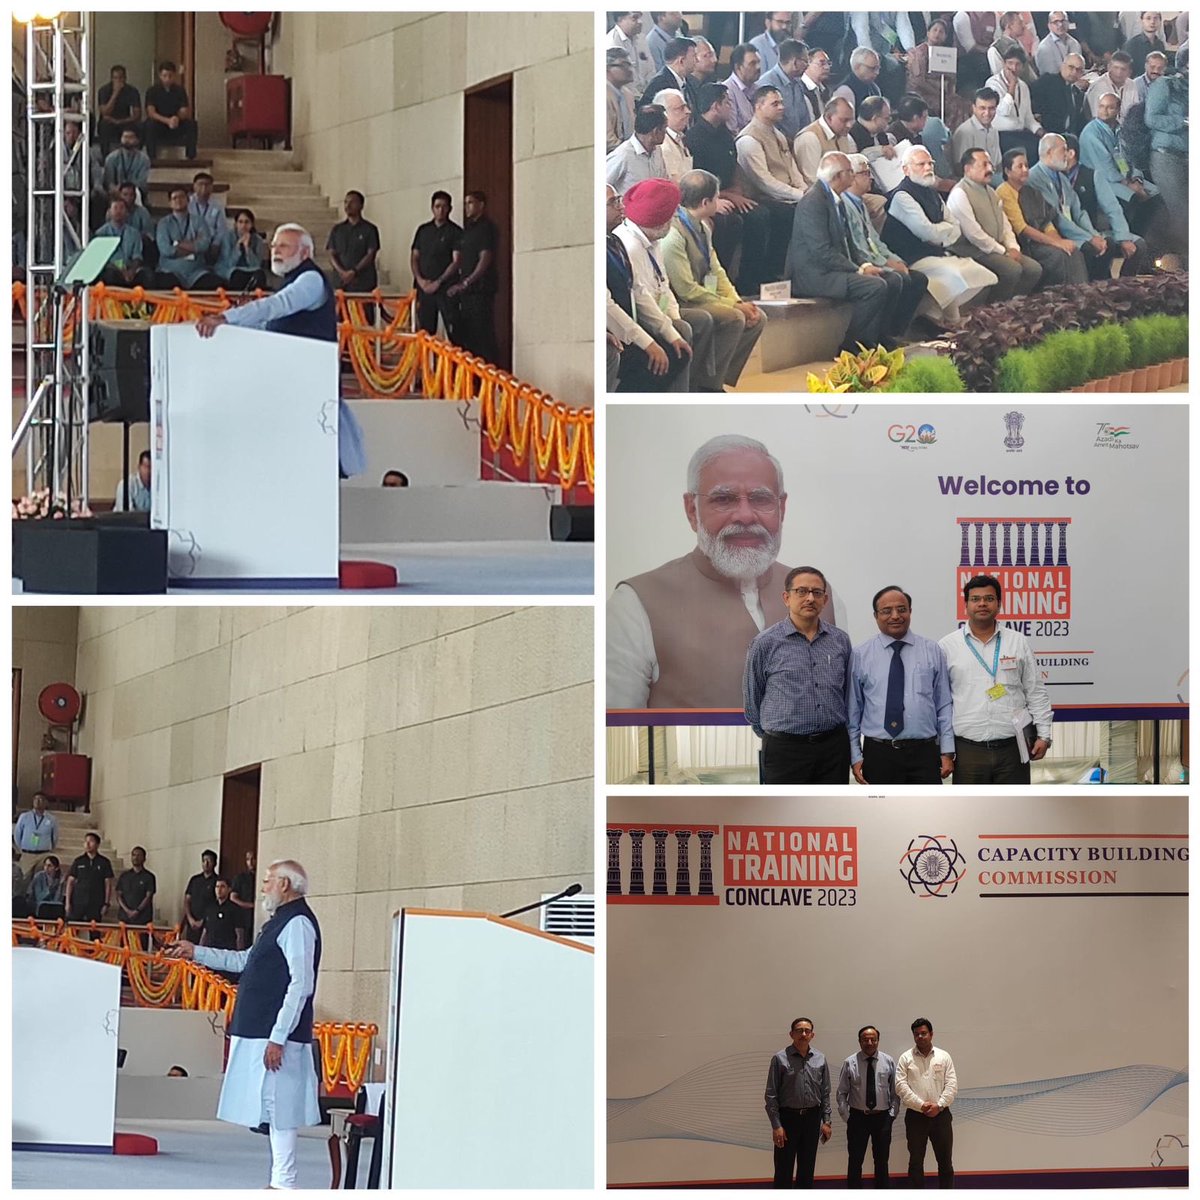 यही समय है, सही समय है।  #NIHFW team represented by Director @DheeShah  @DrMaCh007 @DrDKYad68542730  at  1st National Training Conclave inaugurated by honourable PM with direct message of govt focus on quality and capacity building, through National civil training institutes.